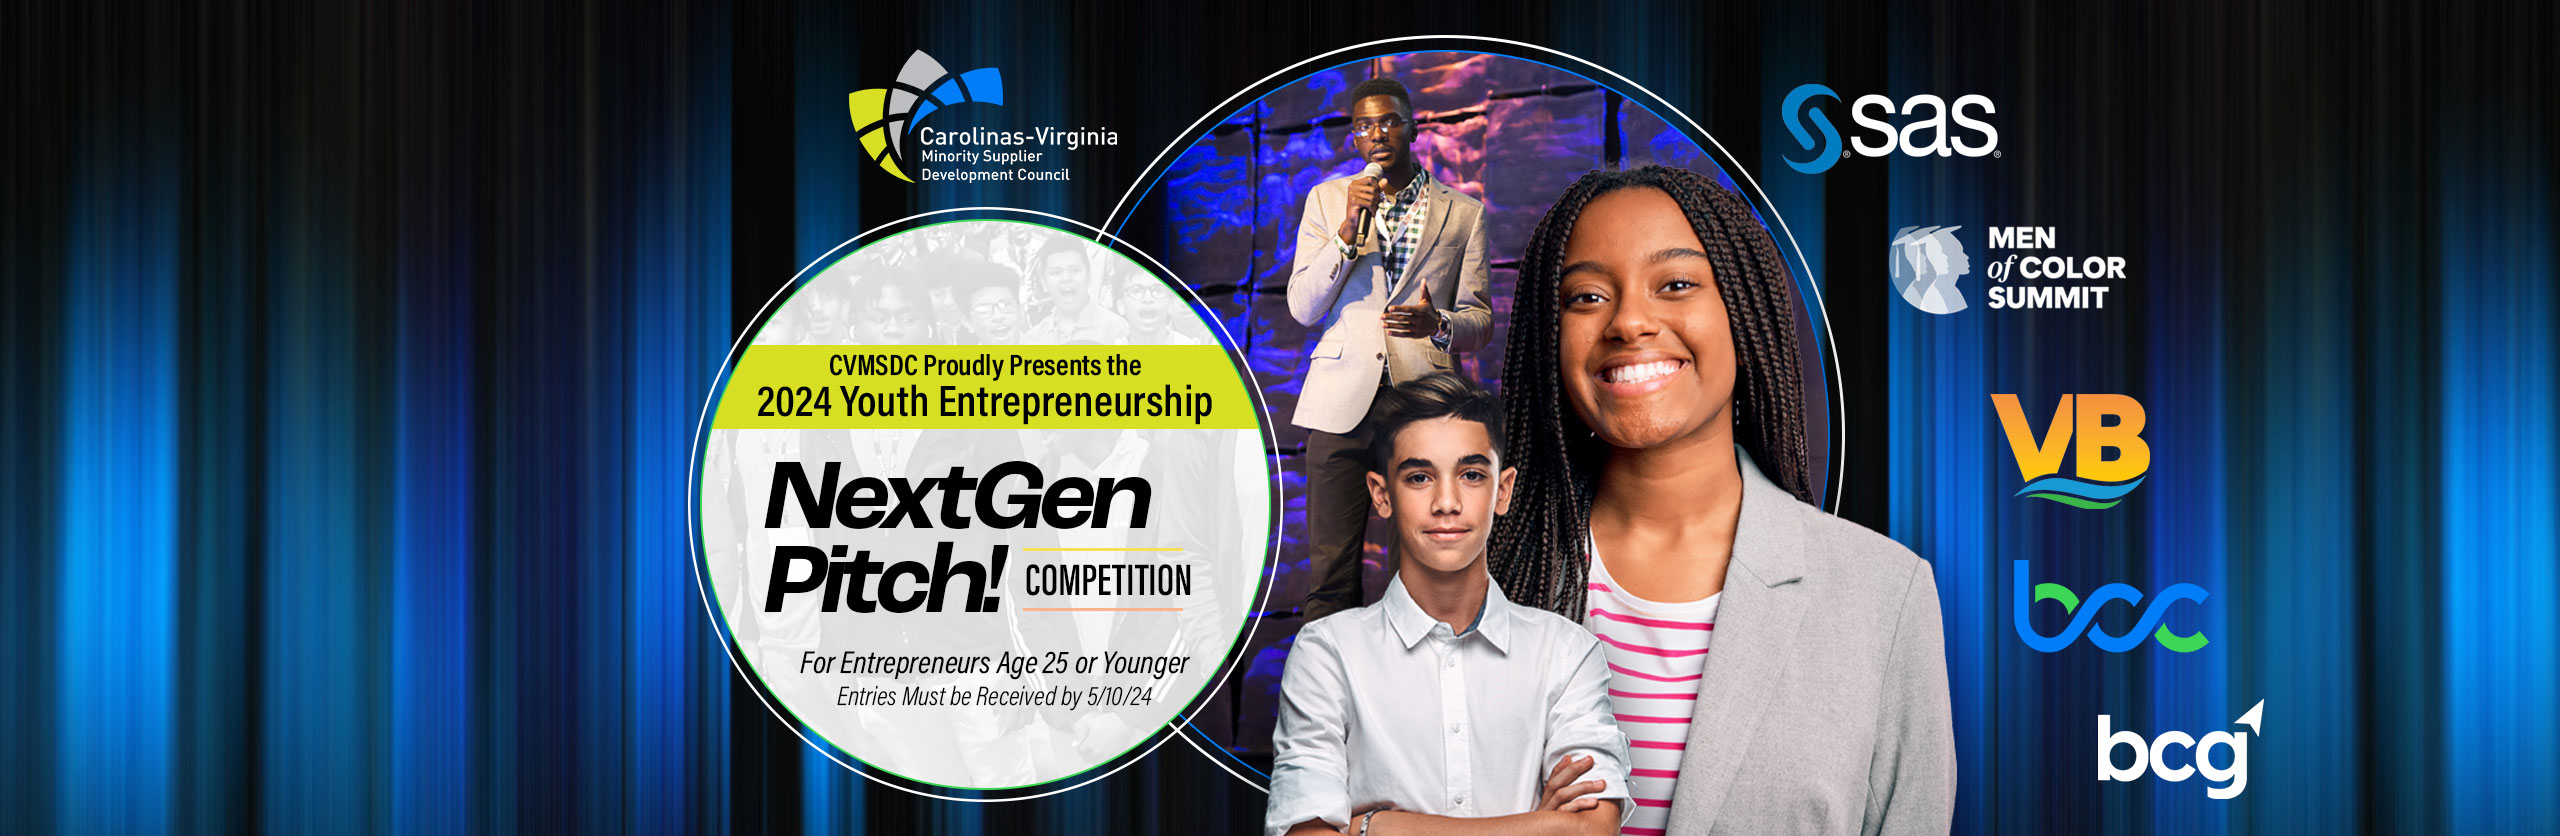 CVMSDC Youth Entrepreneur Pitch Competition